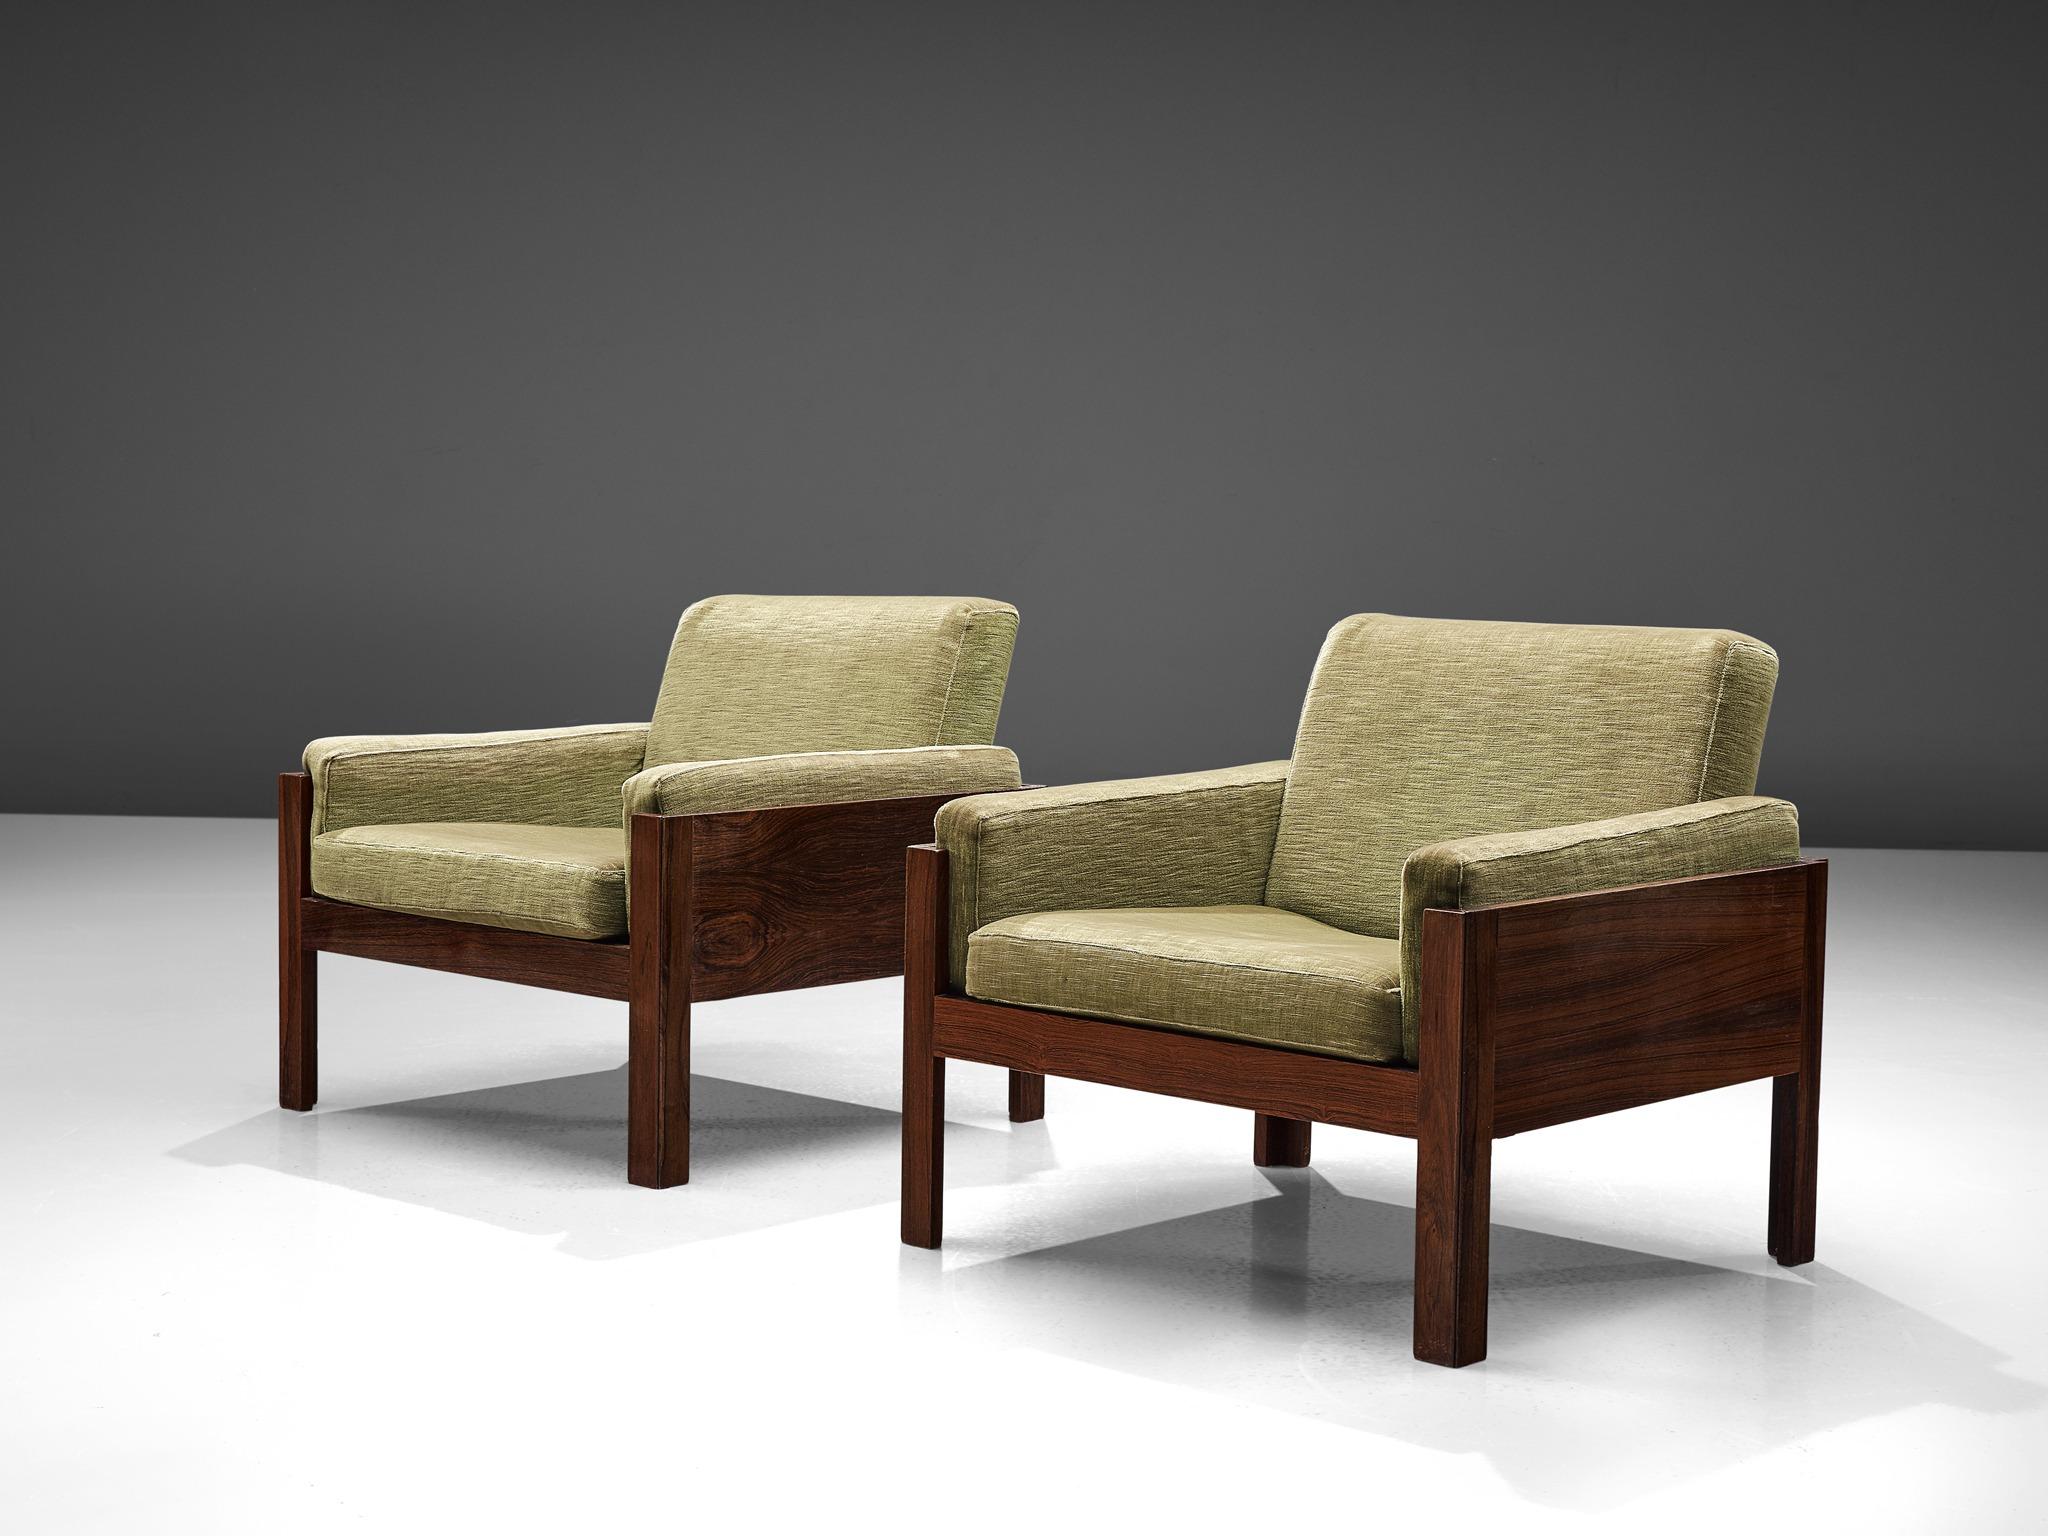 Lounge chairs in rosewood and green fabric, Scandinavia 1960s.

This set of lounge chairs have a minimalist, modest and modern design. The chairs feature an open character due to the generous space underneath and the use of straight elements. The